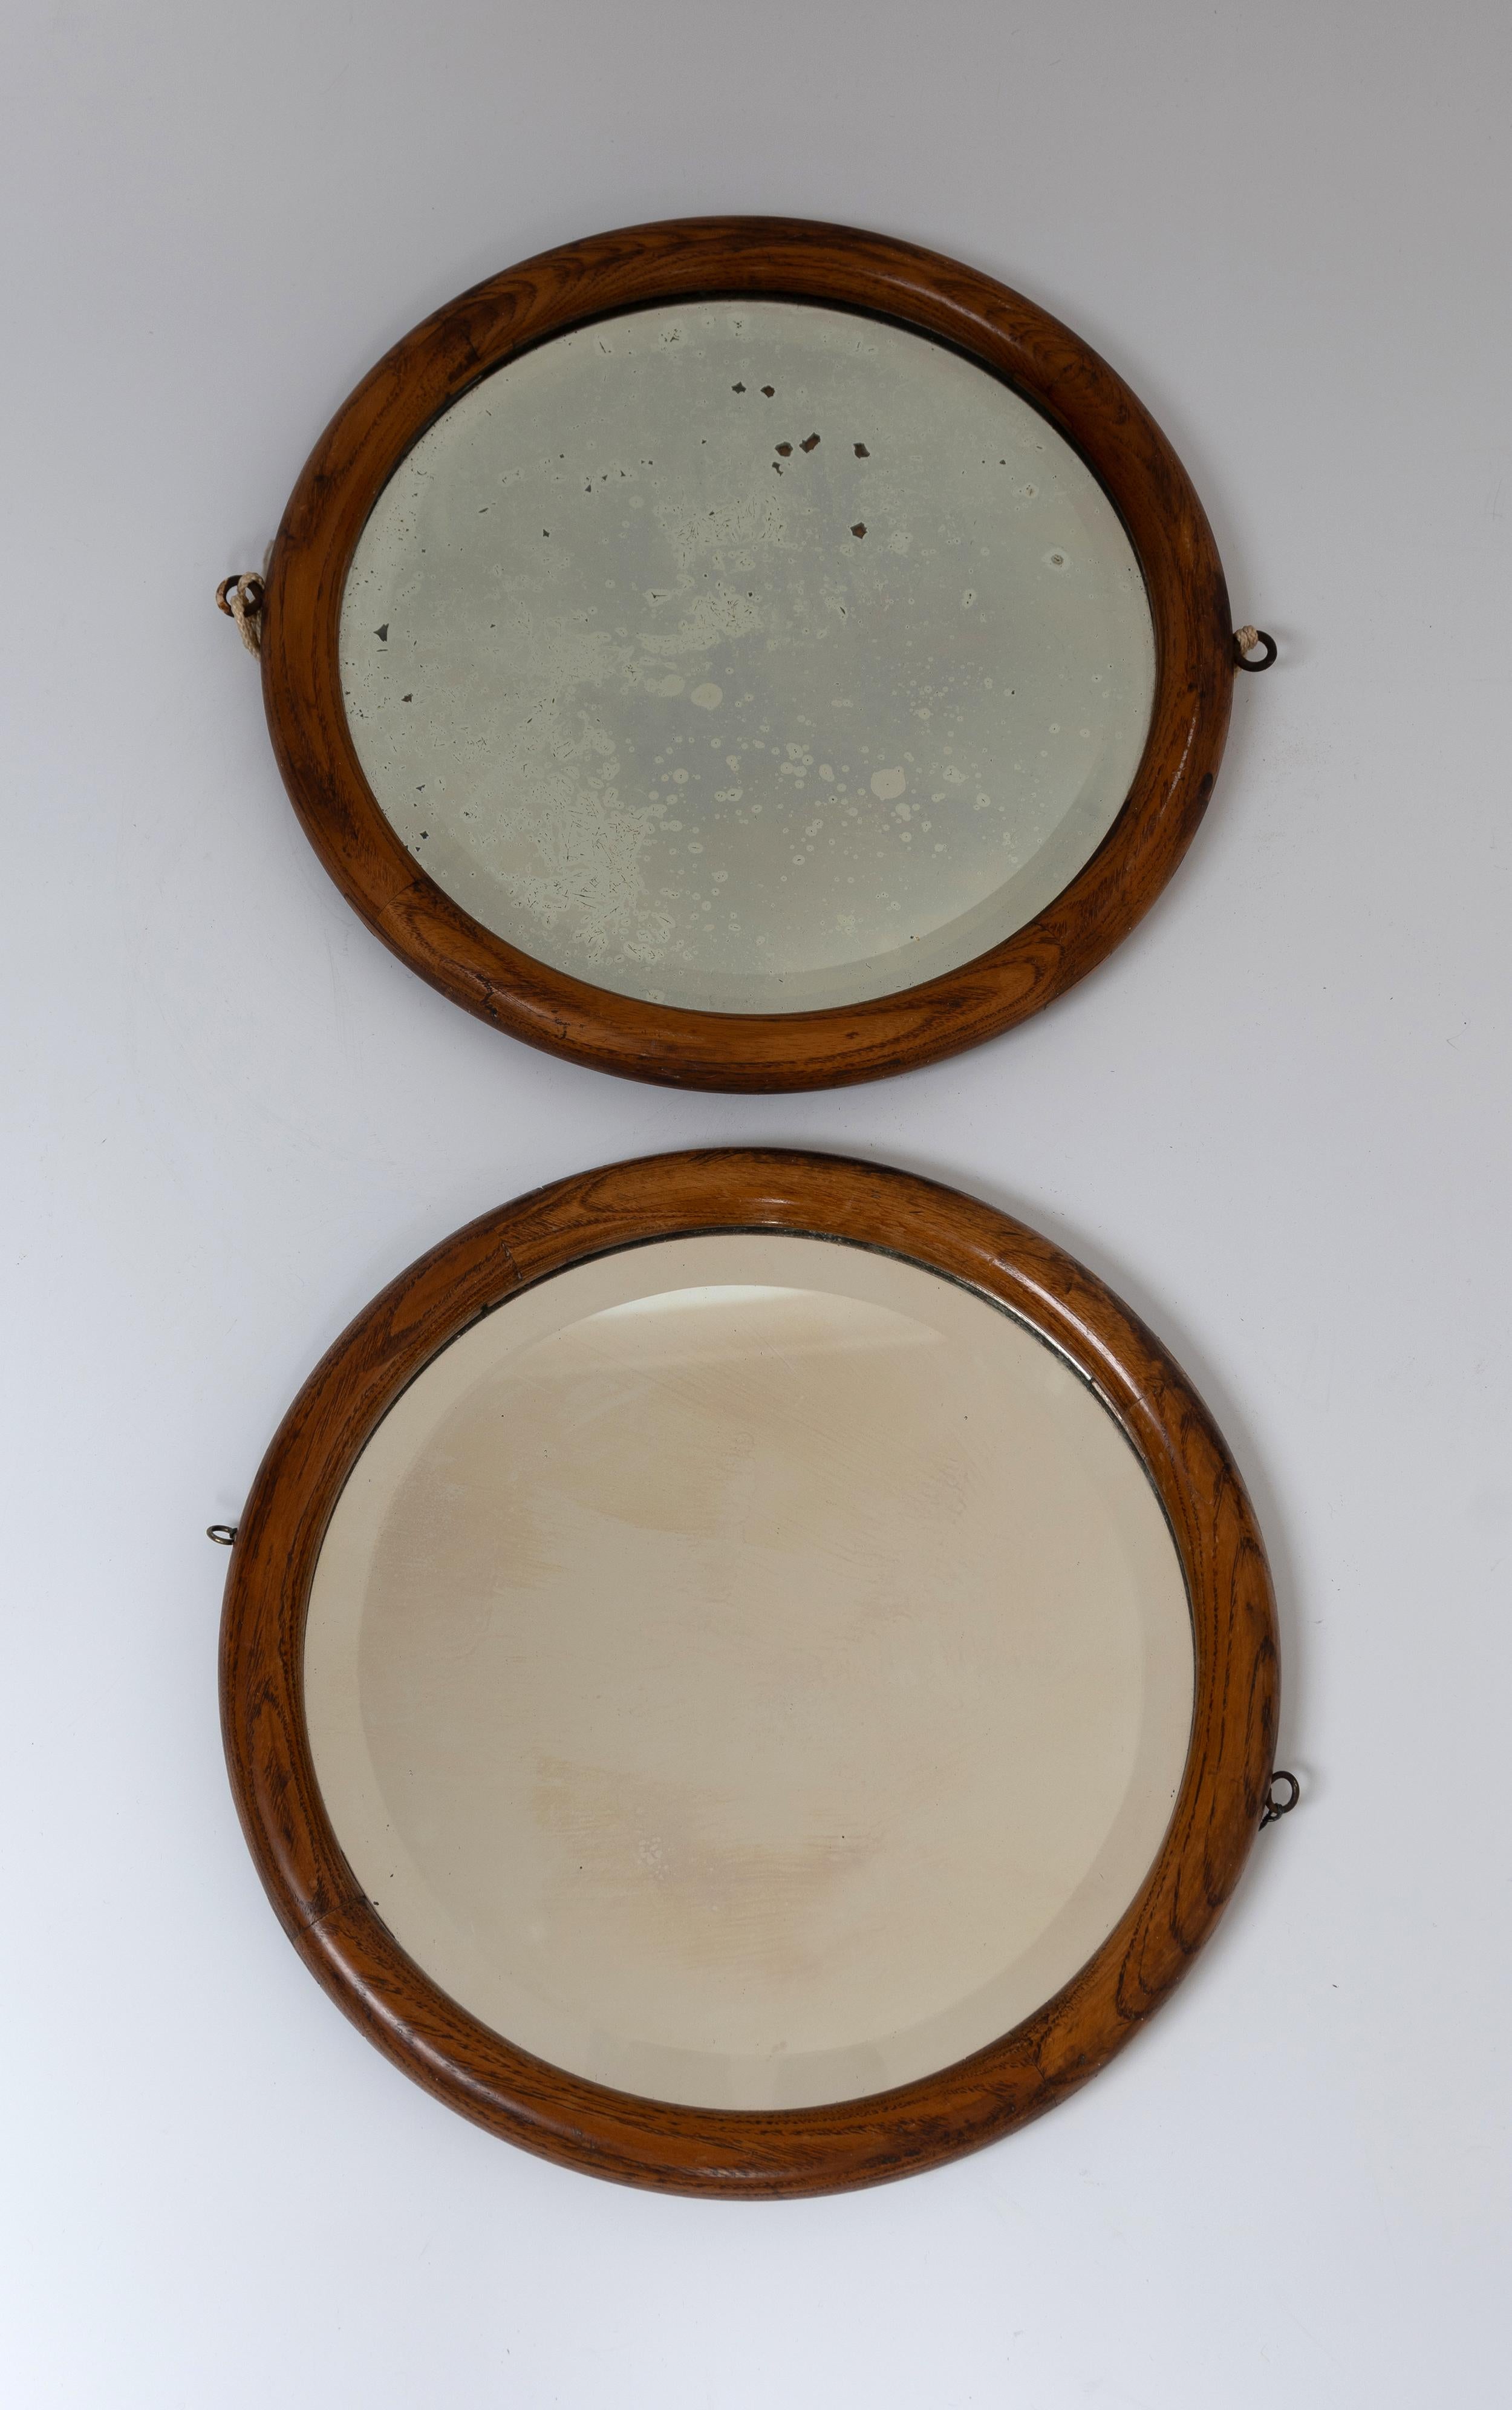 Pair Antique French 19th Century Round Porthole Mirrors
Walnut framed with attractive patination to mirror 
(One mirror may have been previously replaced ).
In good condition commensurate of age, with signs of ageing (Please refer to photos).